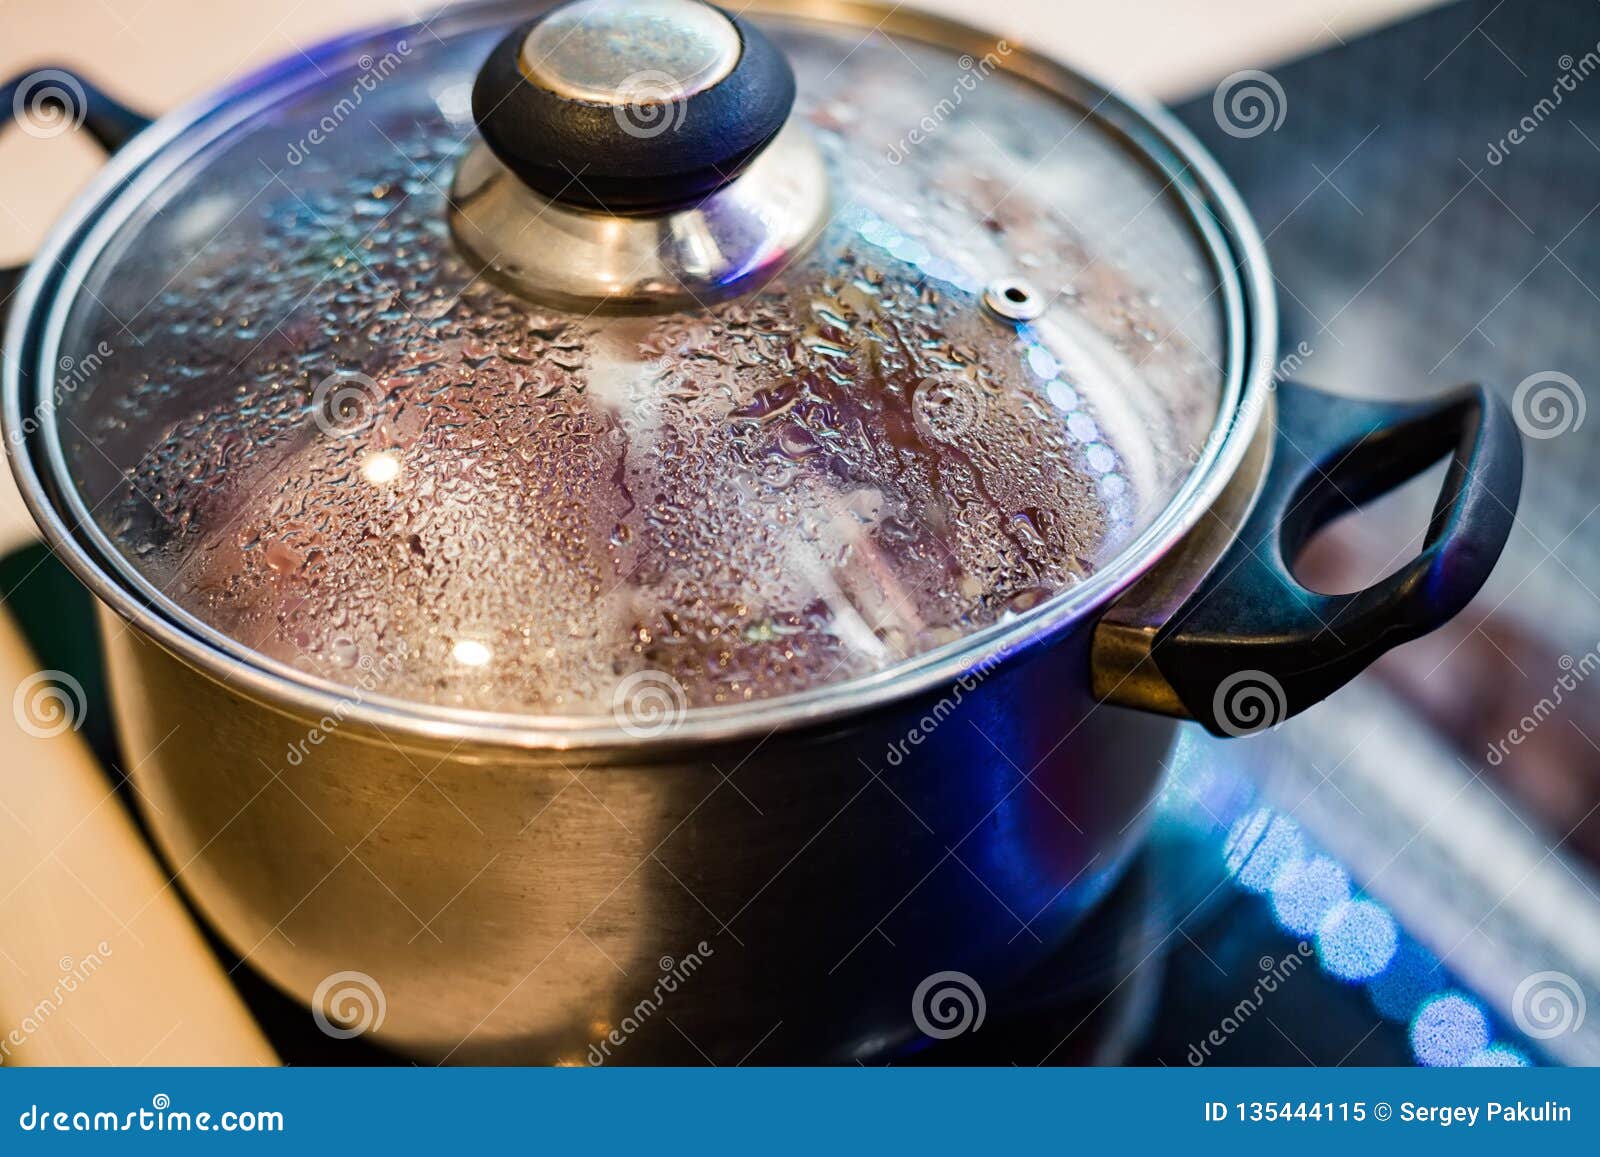 Drops of Water in a Hot Pan - Stock Image - C028/1244 - Science Photo  Library